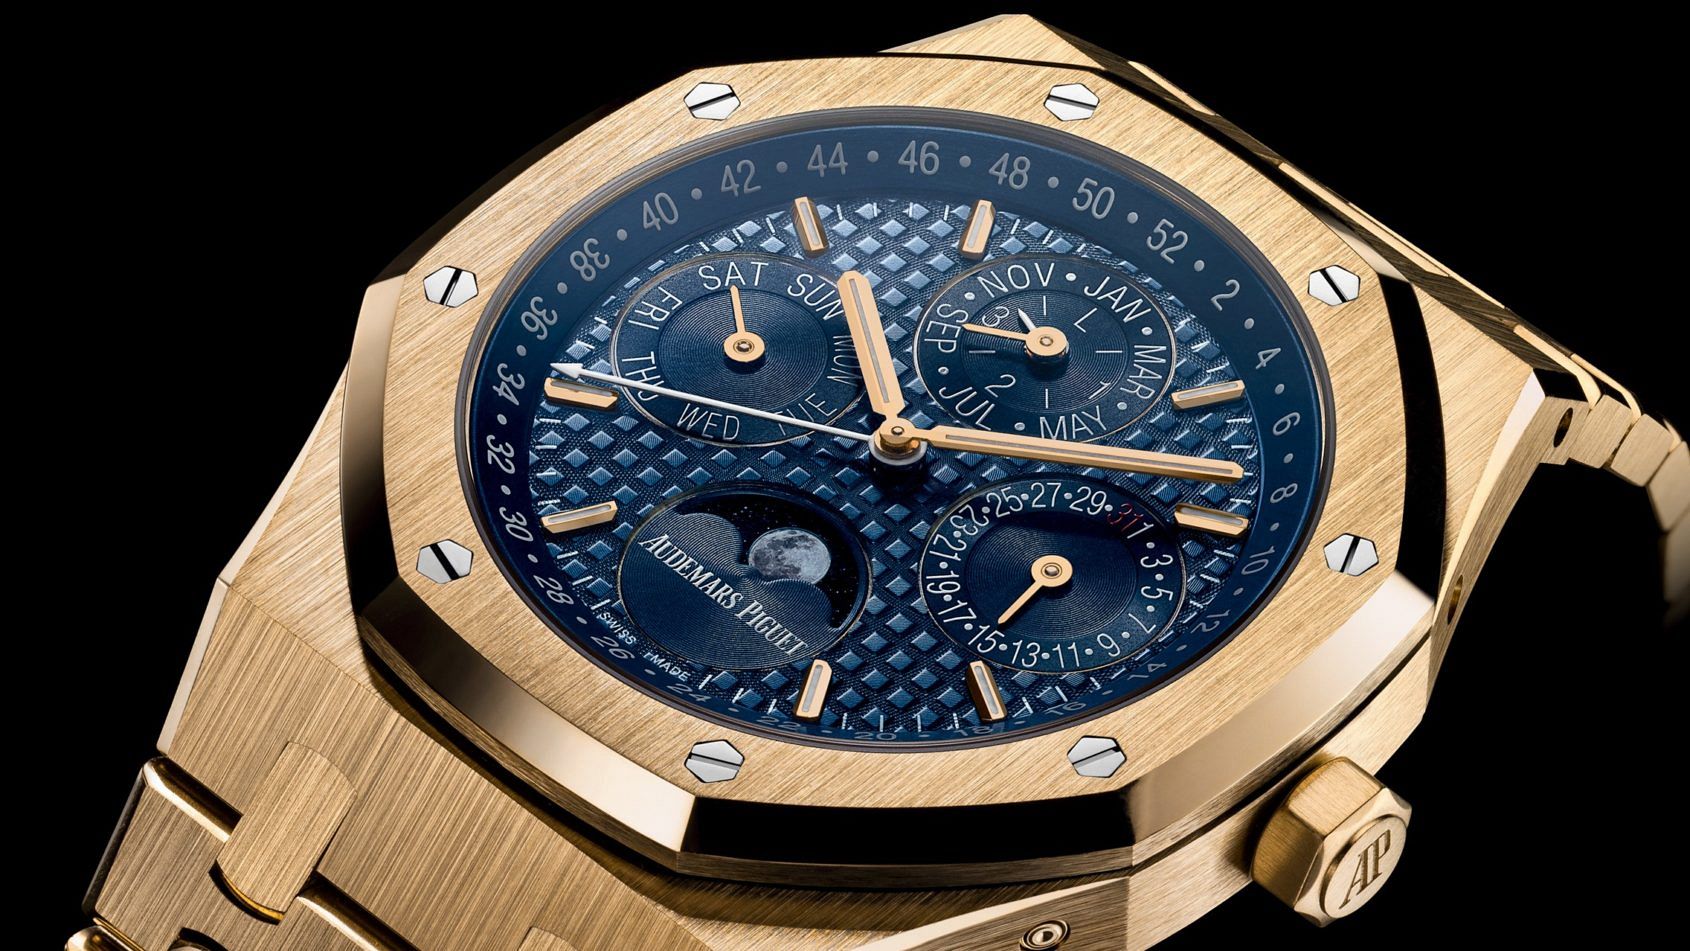 most expensive watches sold on Ebay in 2020